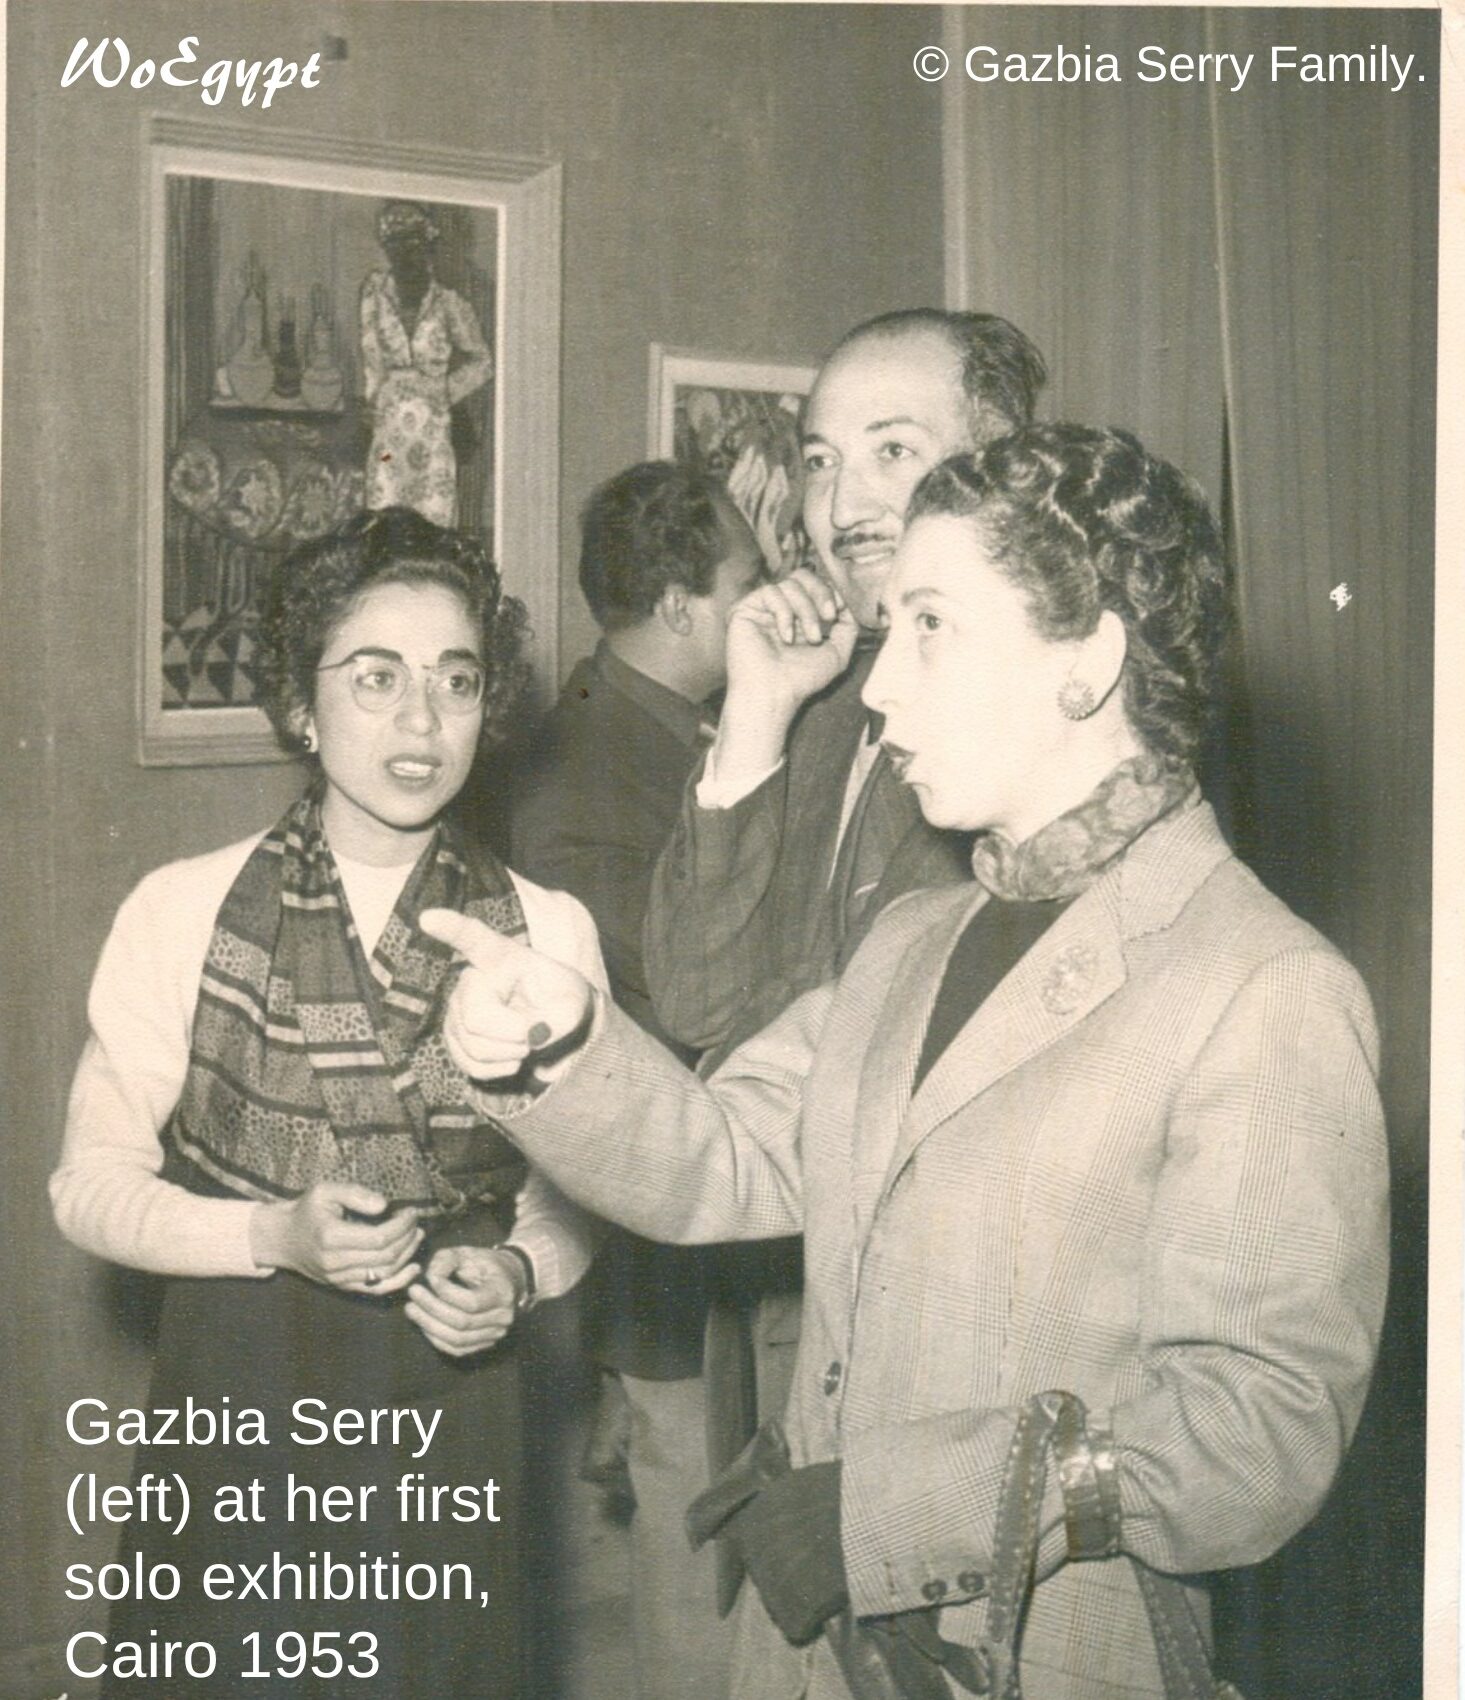 Gazbia Sirry (1925 - 2021): She poured her soul out 